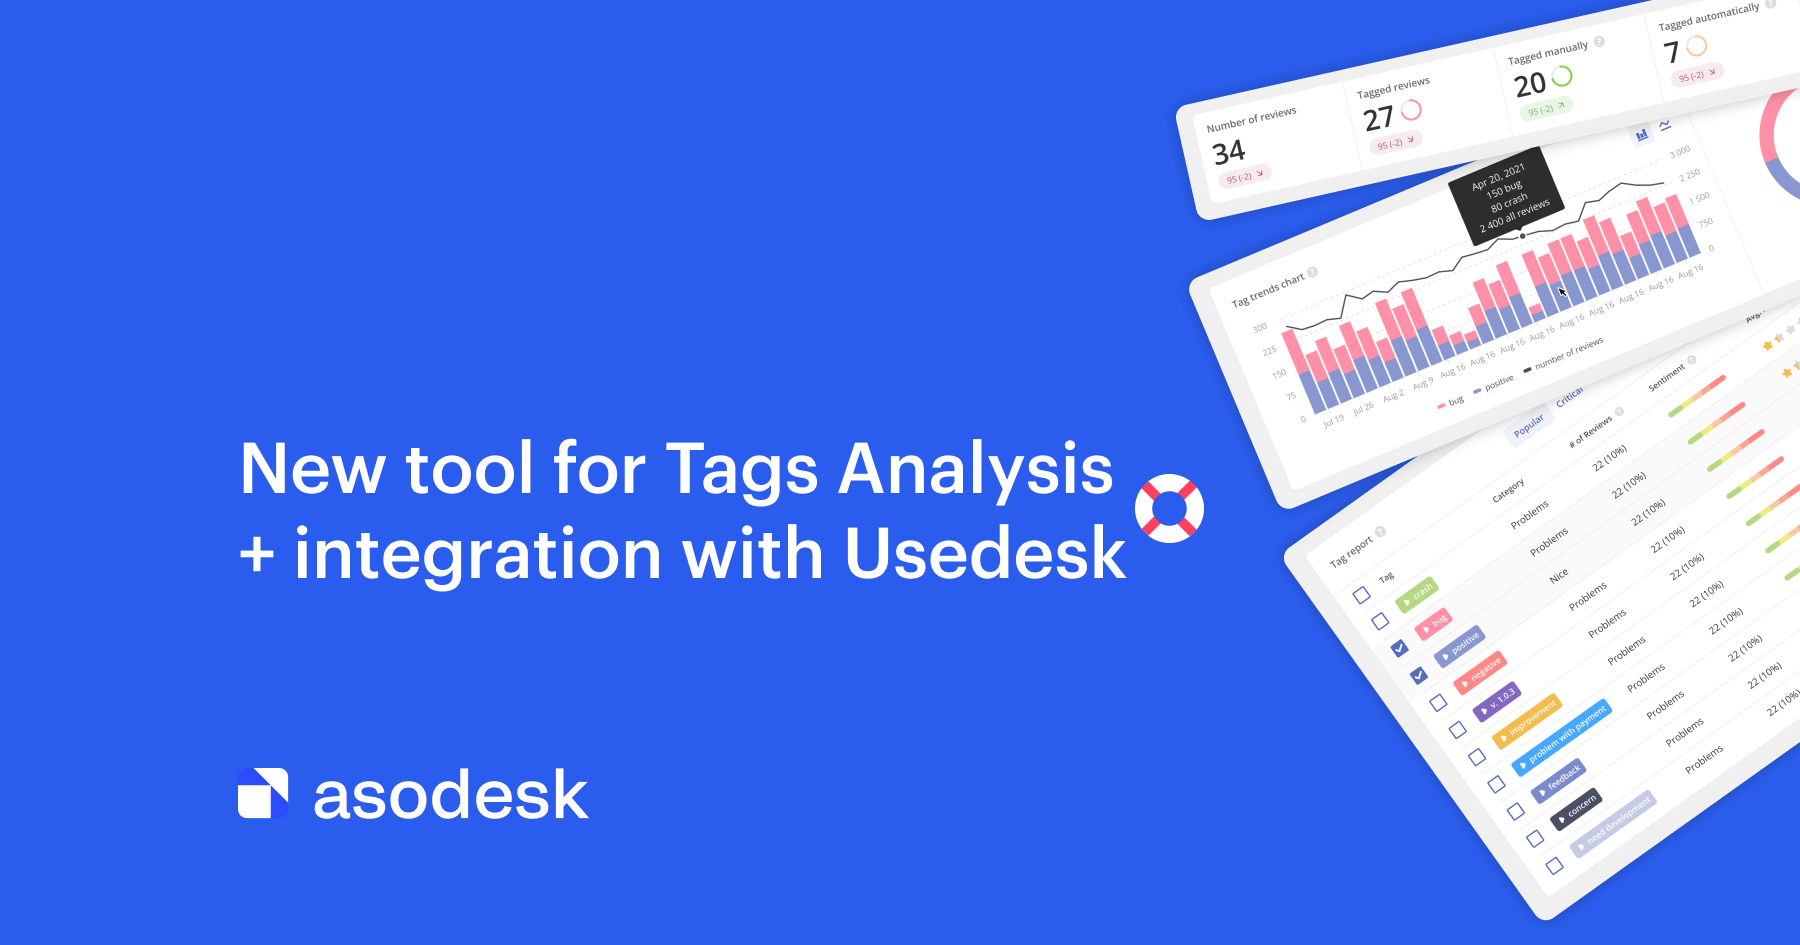 We have added the option to analyze tags on reviews and integrated Asodesk with Usedesk